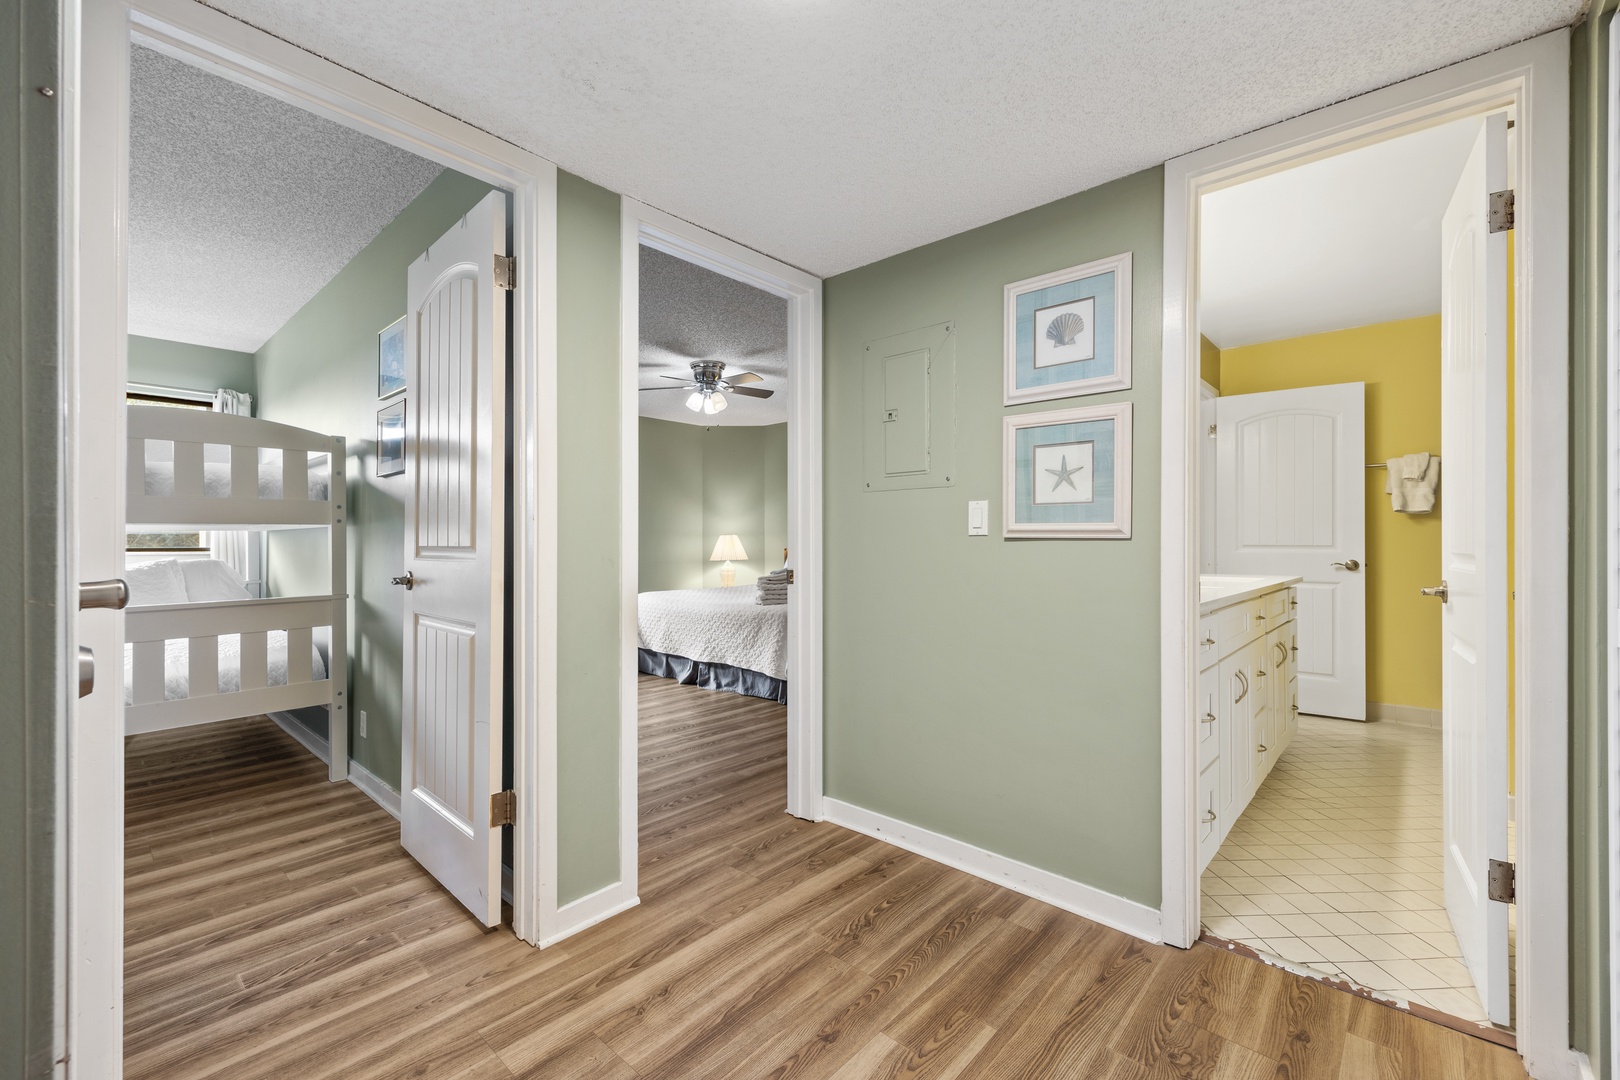 Two additional, spacious bedrooms await!